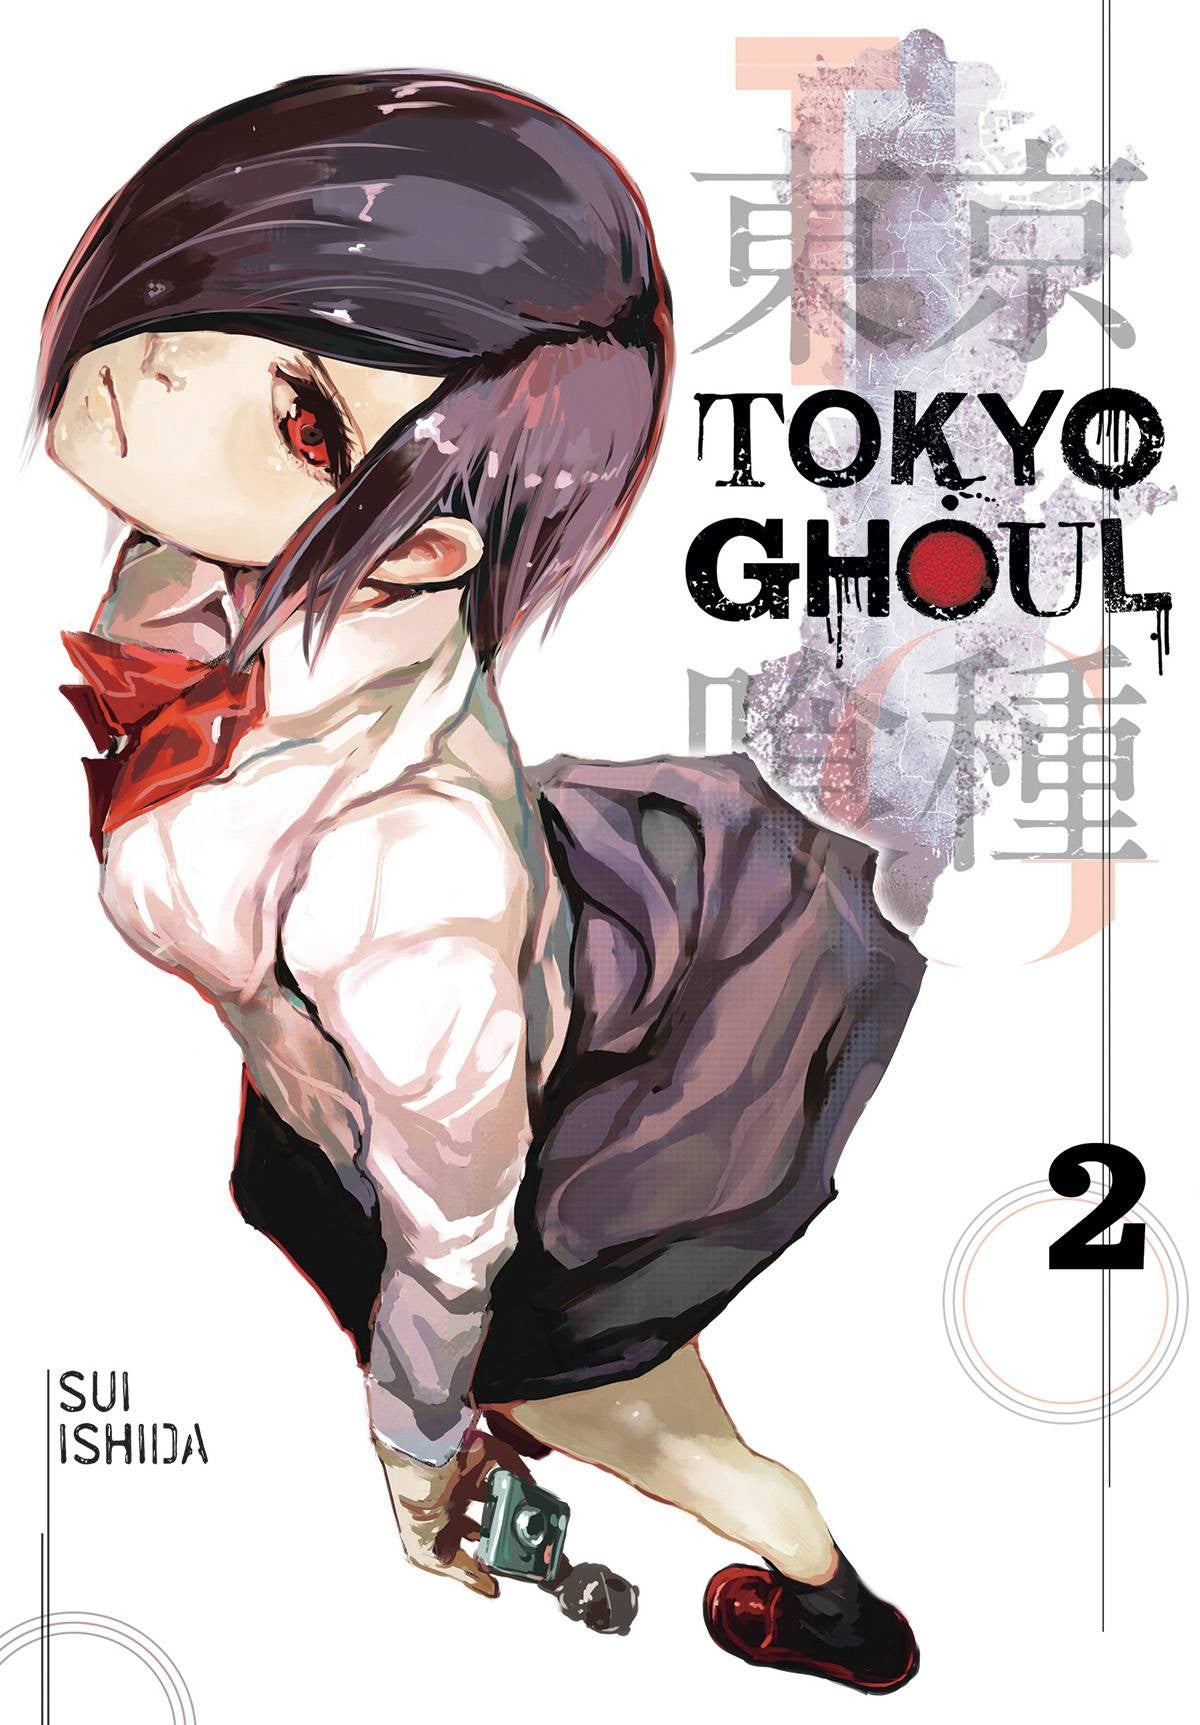 TOKYO GHOUL GN VOL 02 COVER